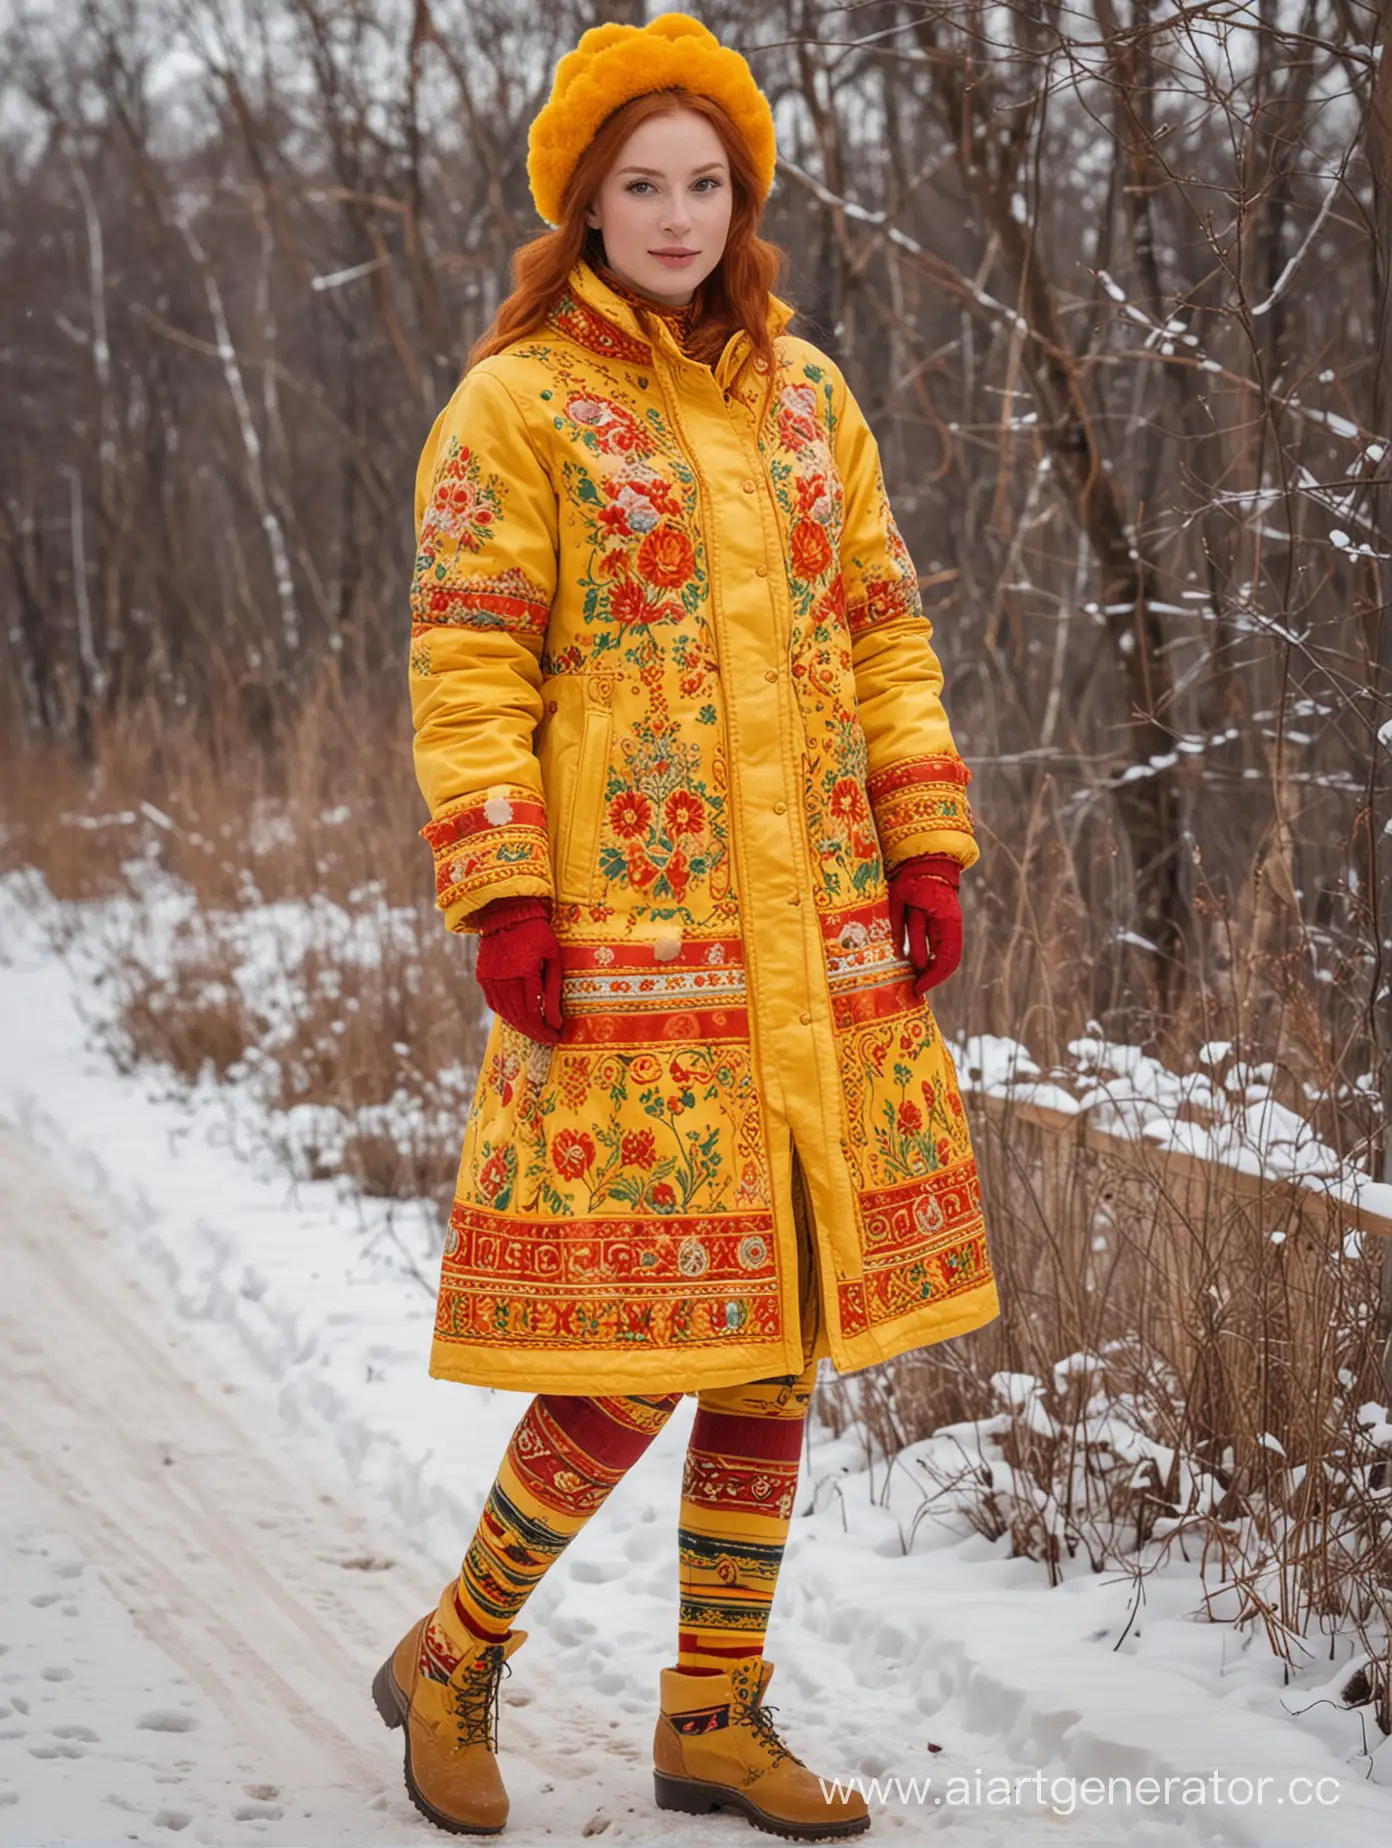 RedHaired-Russian-Princess-in-Khokhloma-Jacket-and-Winter-Attire